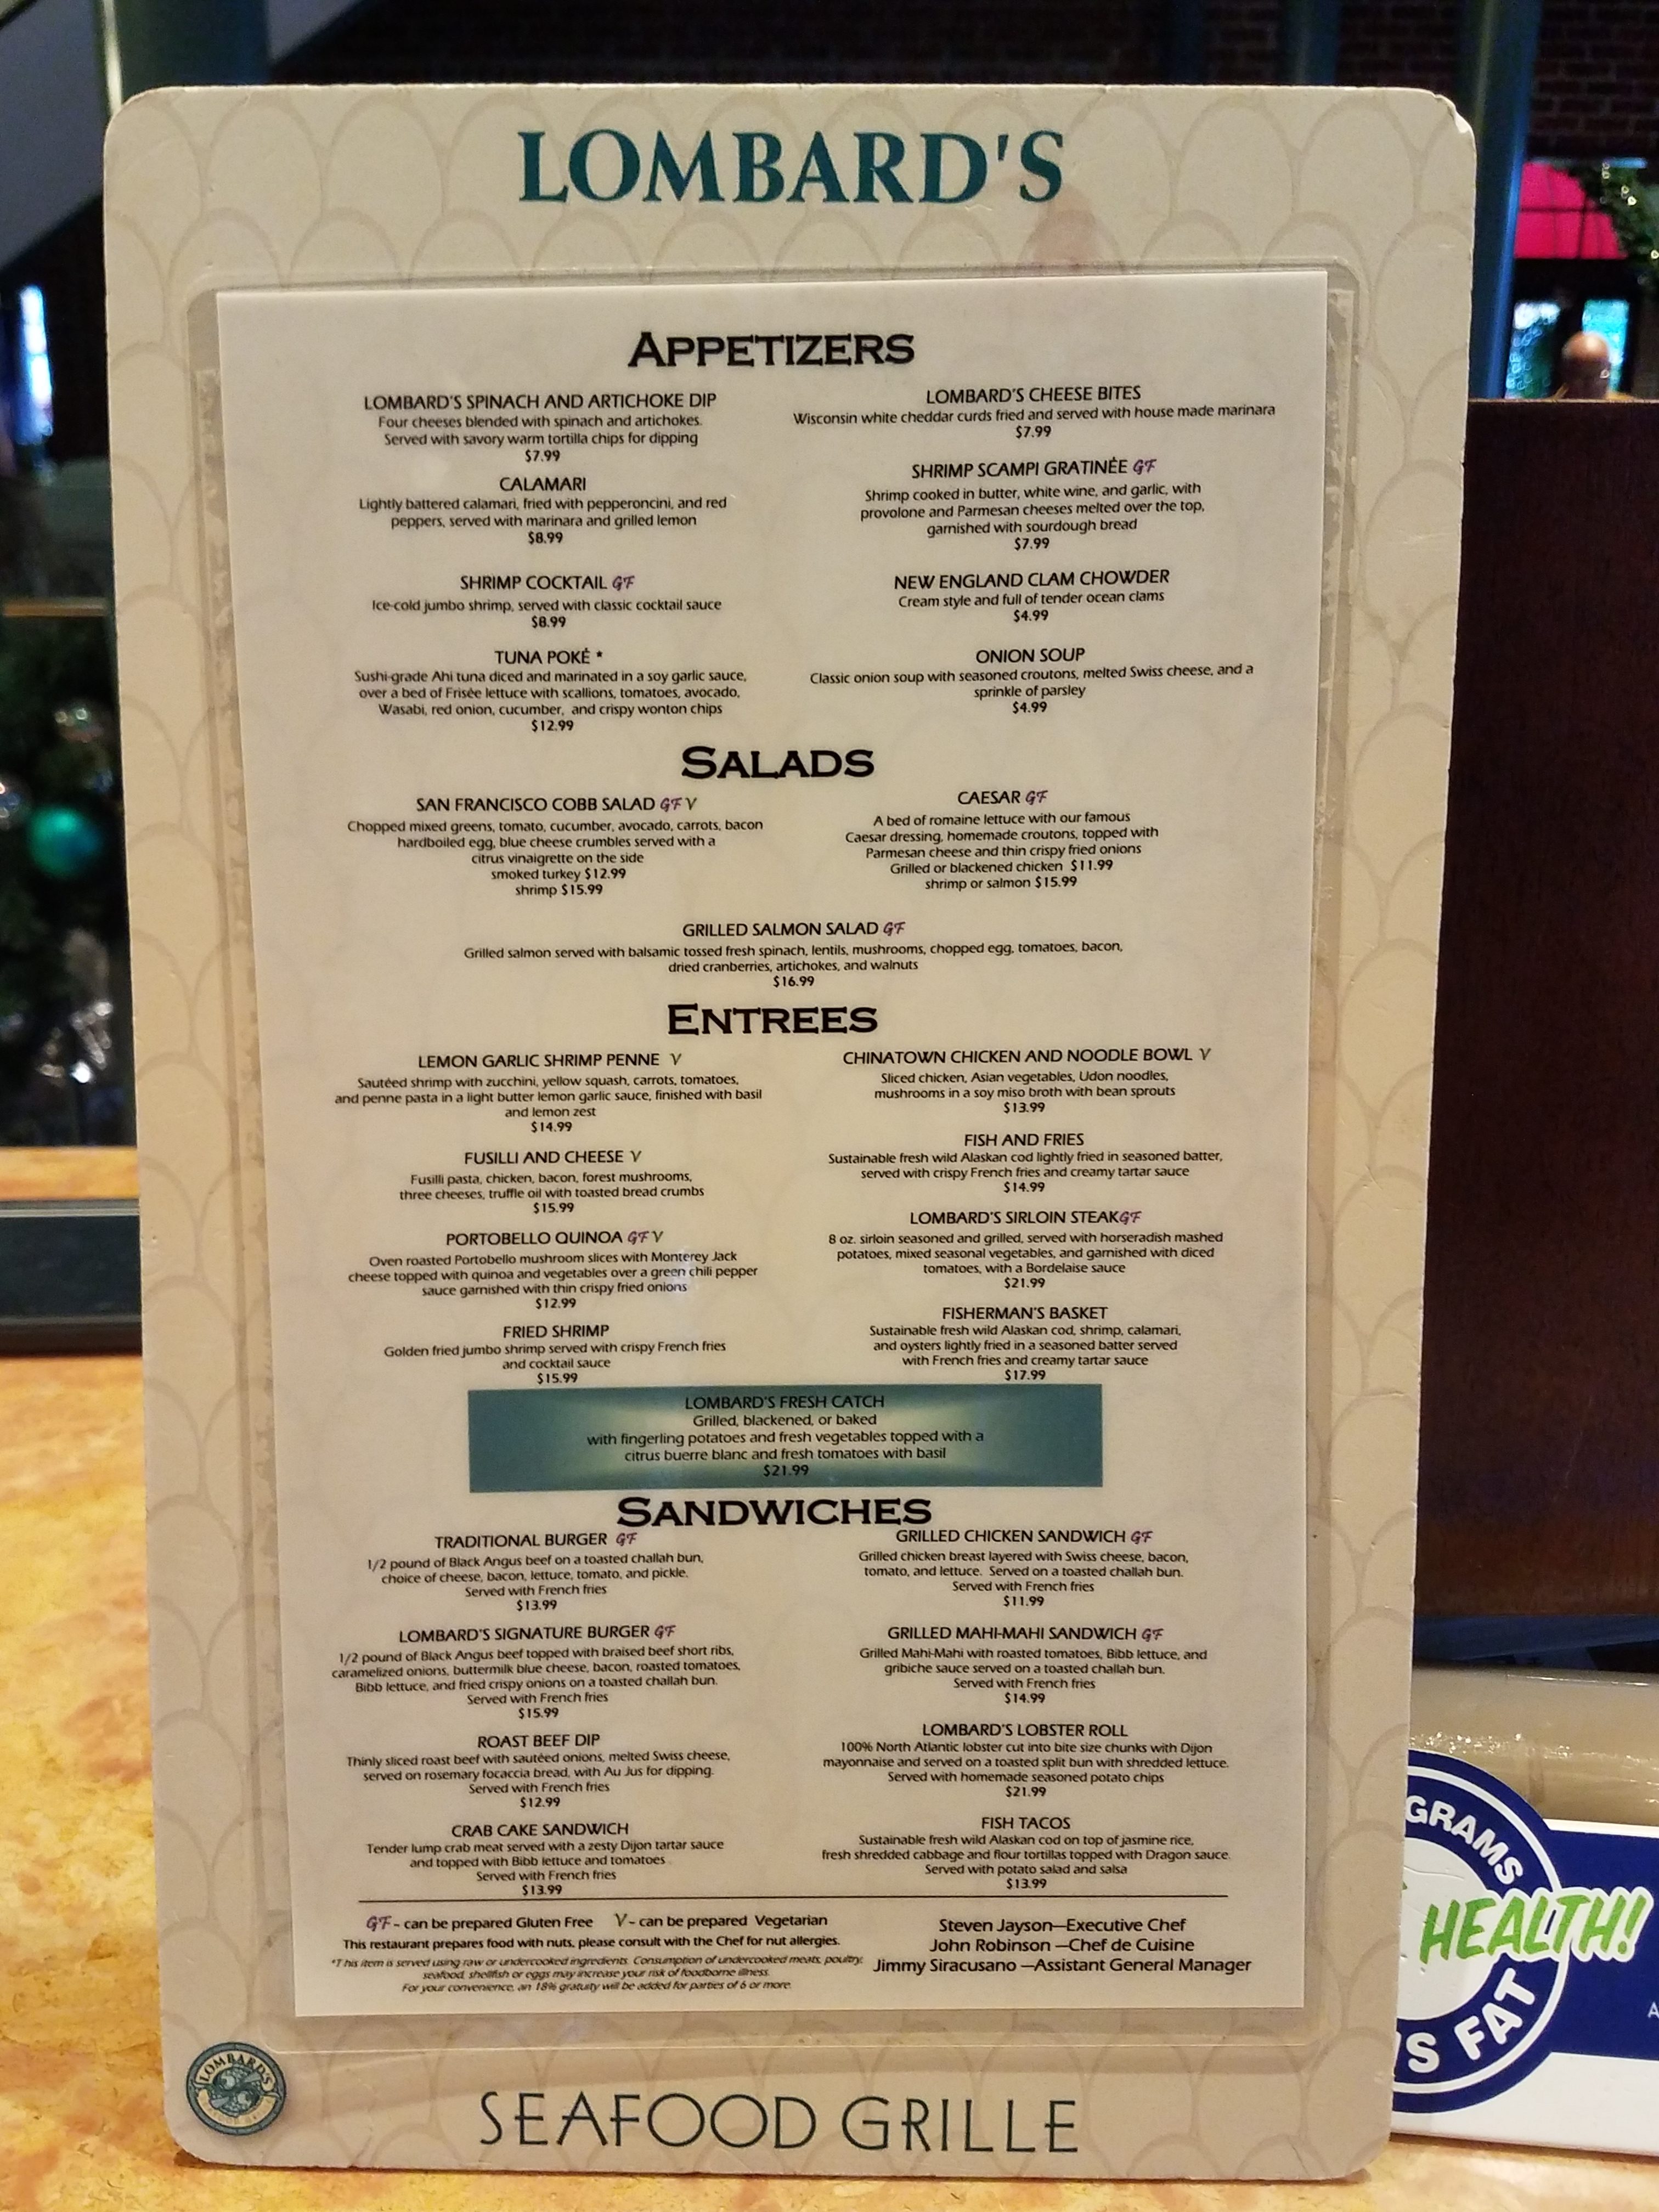 Menu at Lombard's Seafood Grille in Universal Studios Orlando by unofficialuniversal.com